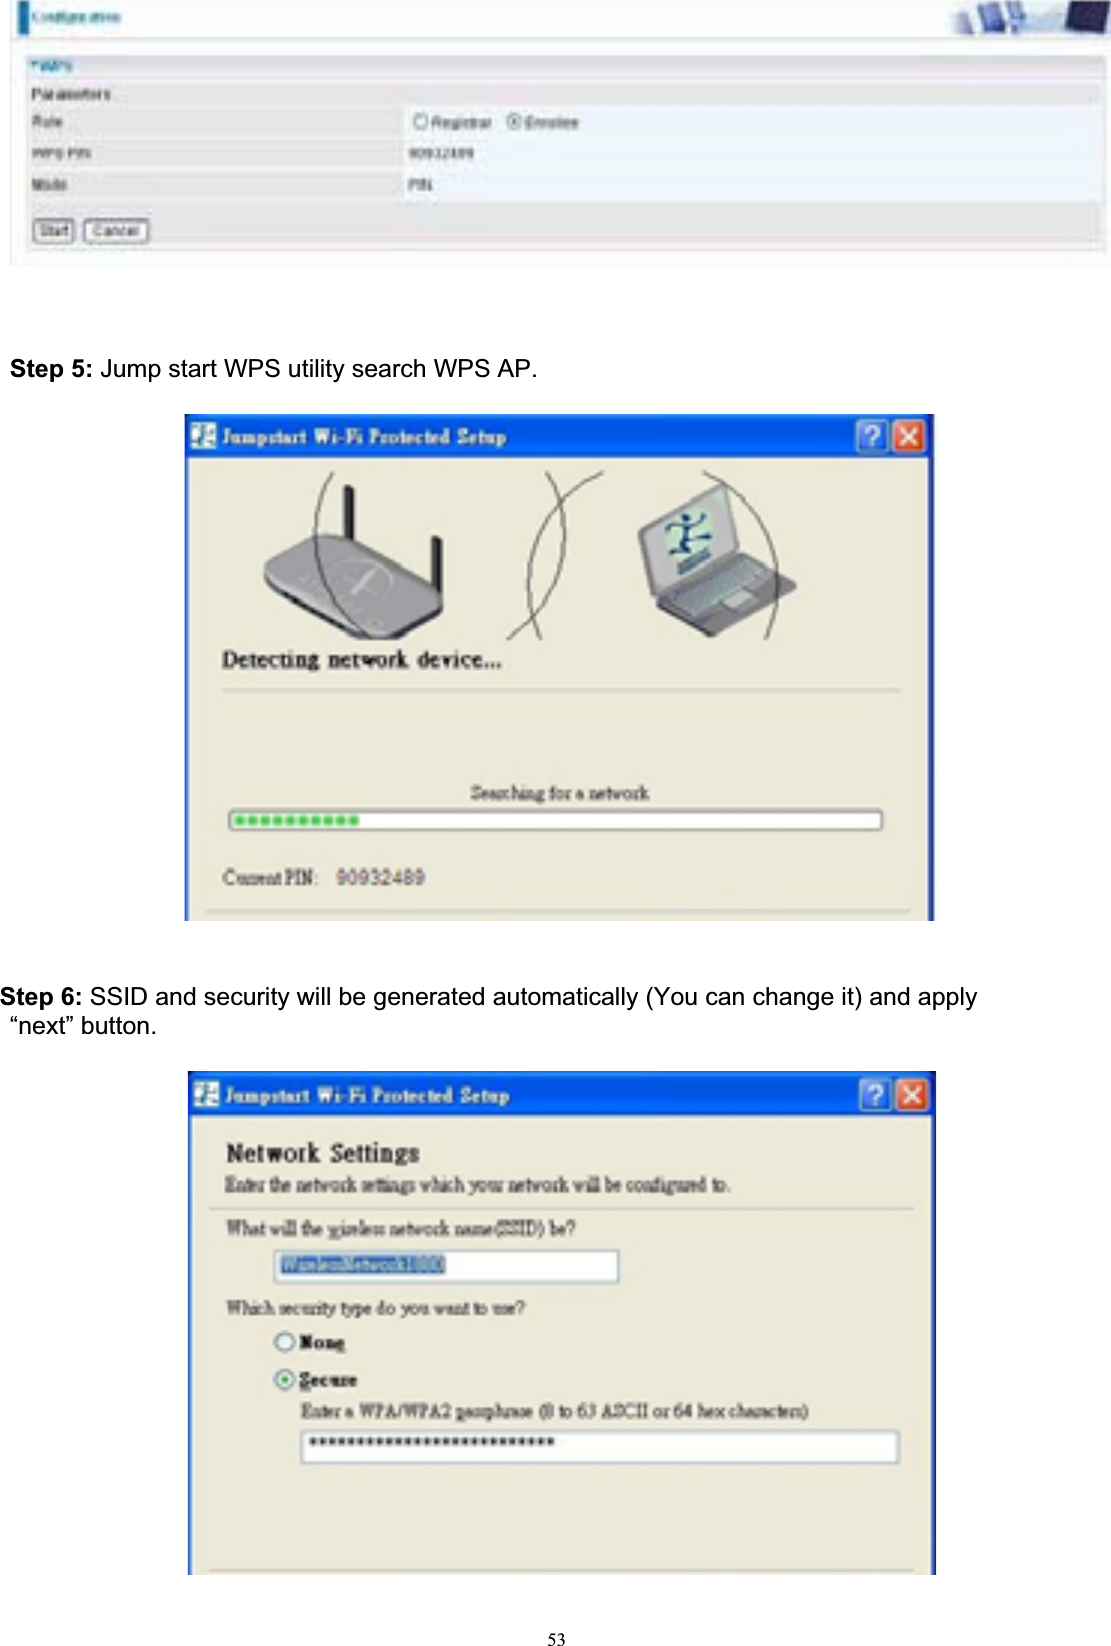 53Step 5: Jump start WPS utility search WPS AP.Step 6: SSID and security will be generated automatically (You can change it) and apply “next” button.